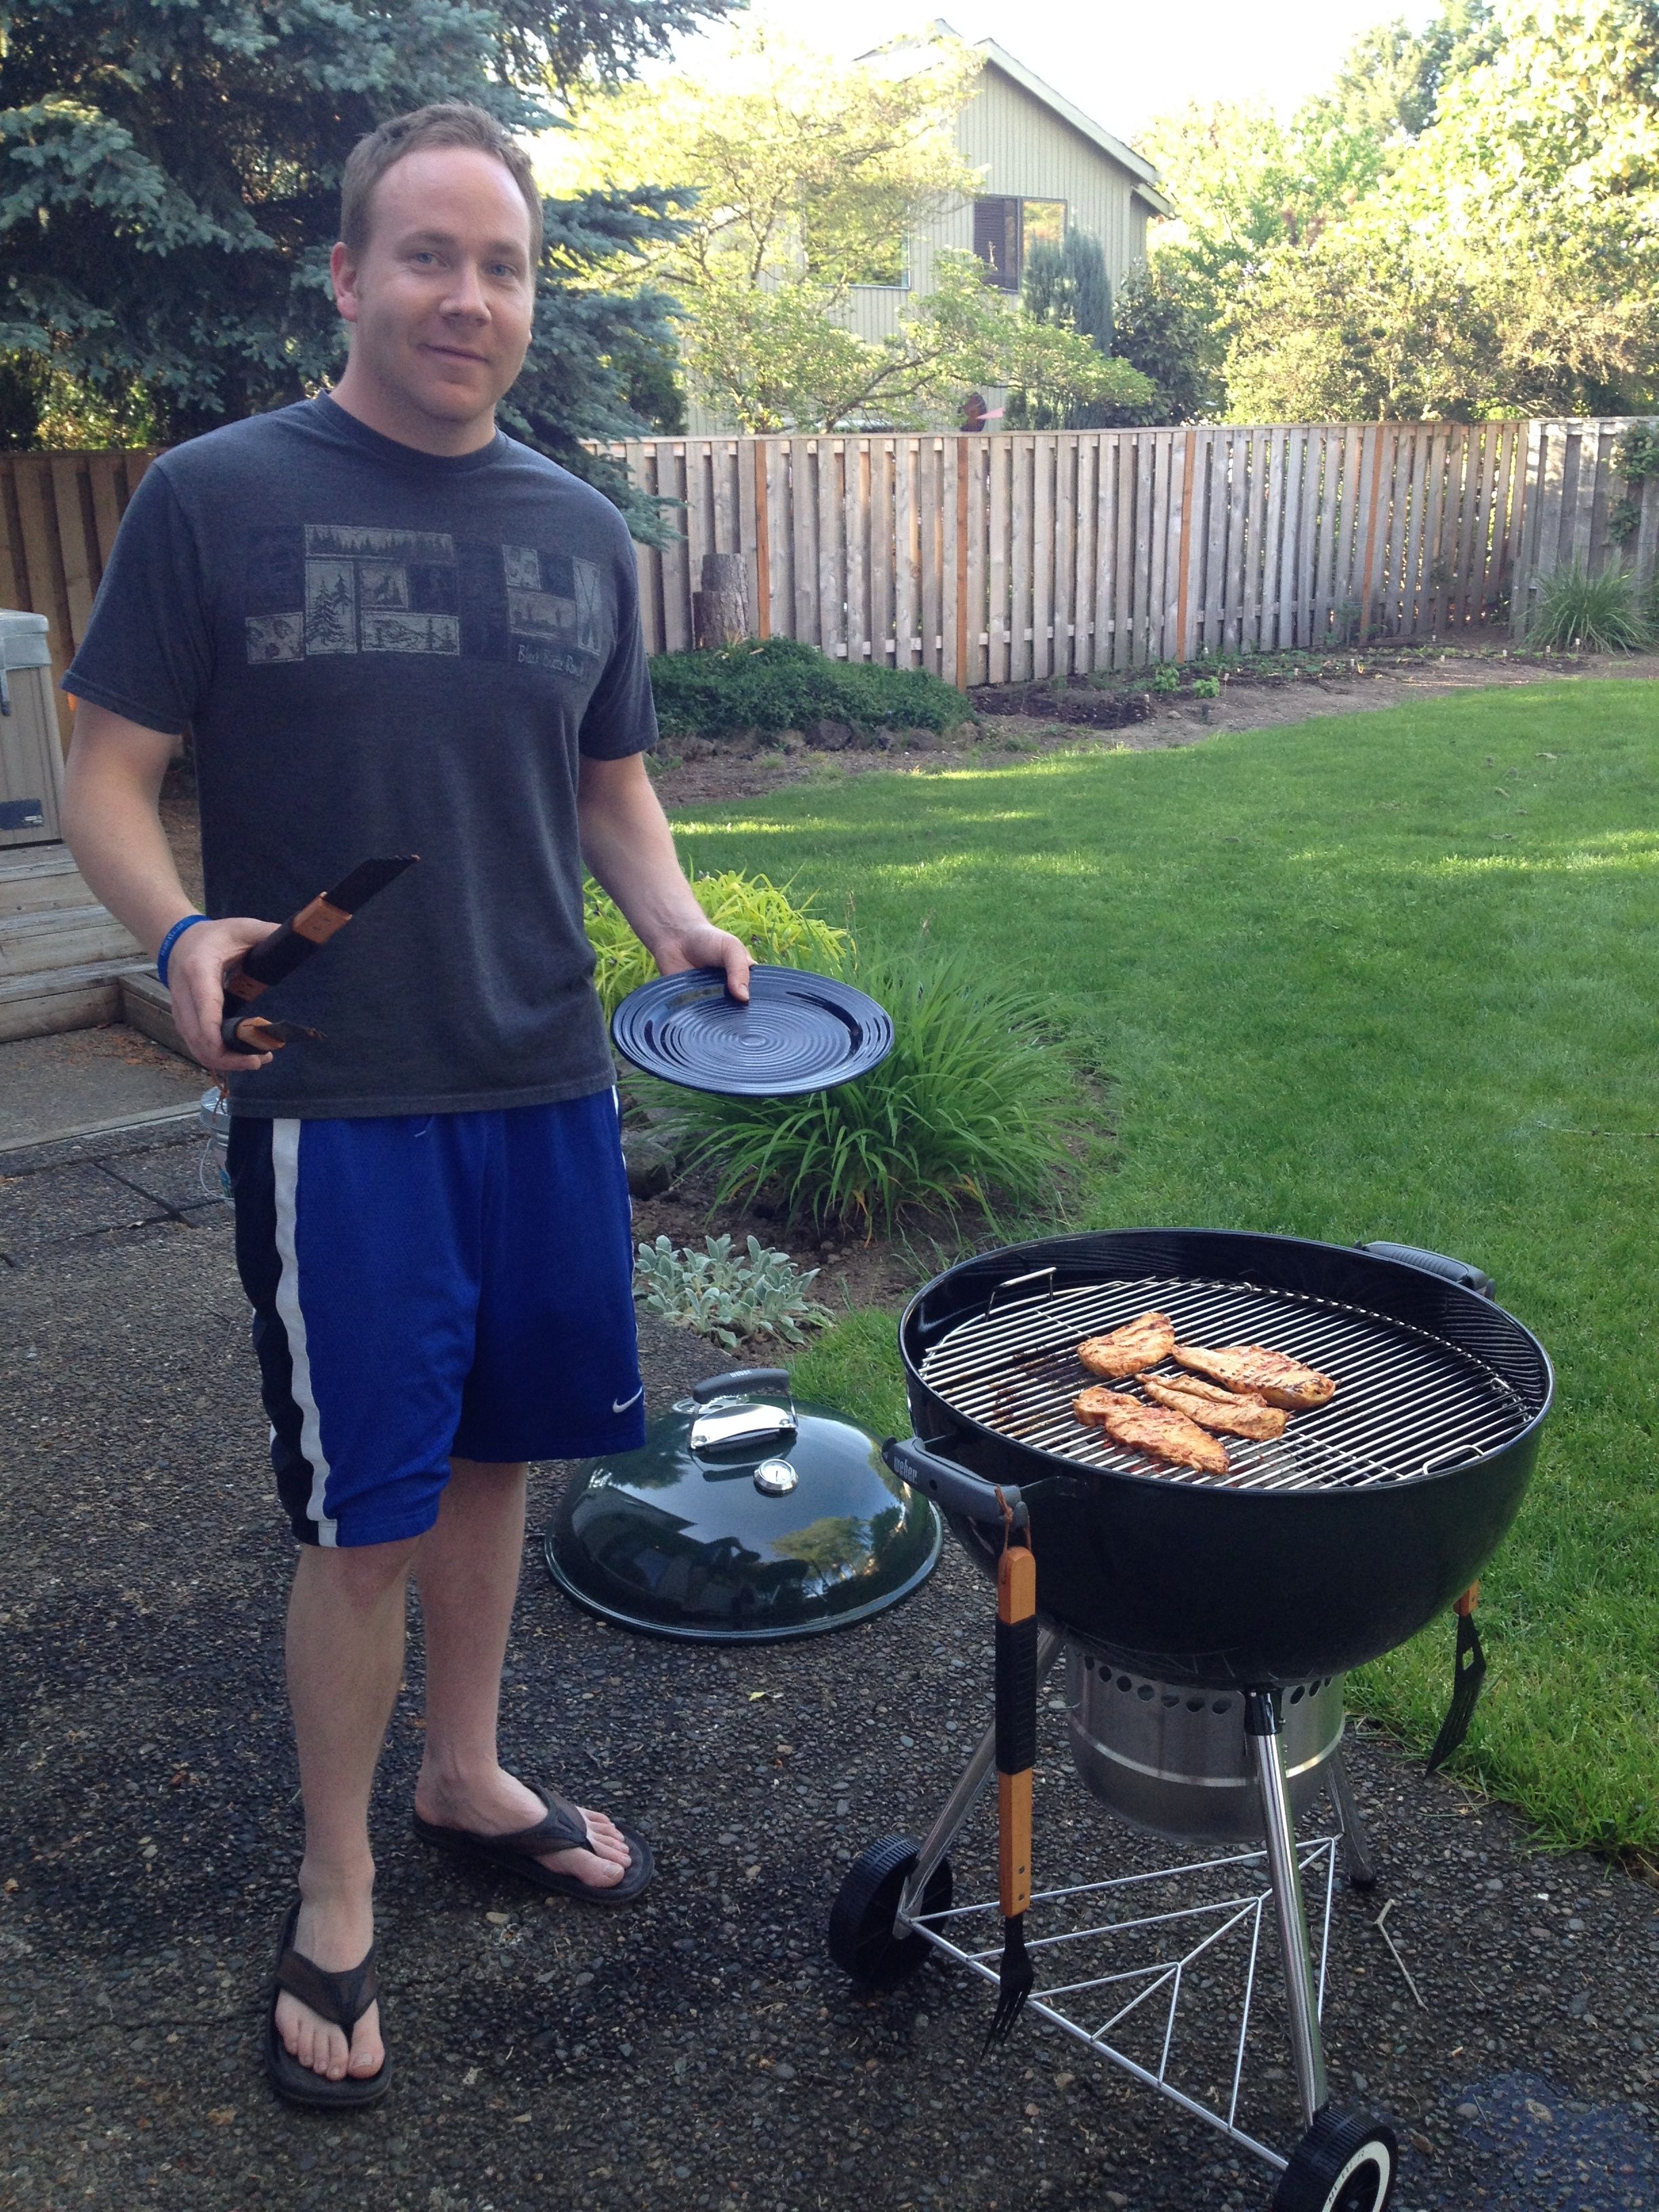 Meet Chris, our new Sales Relationship Specialist (and Grillmaster)